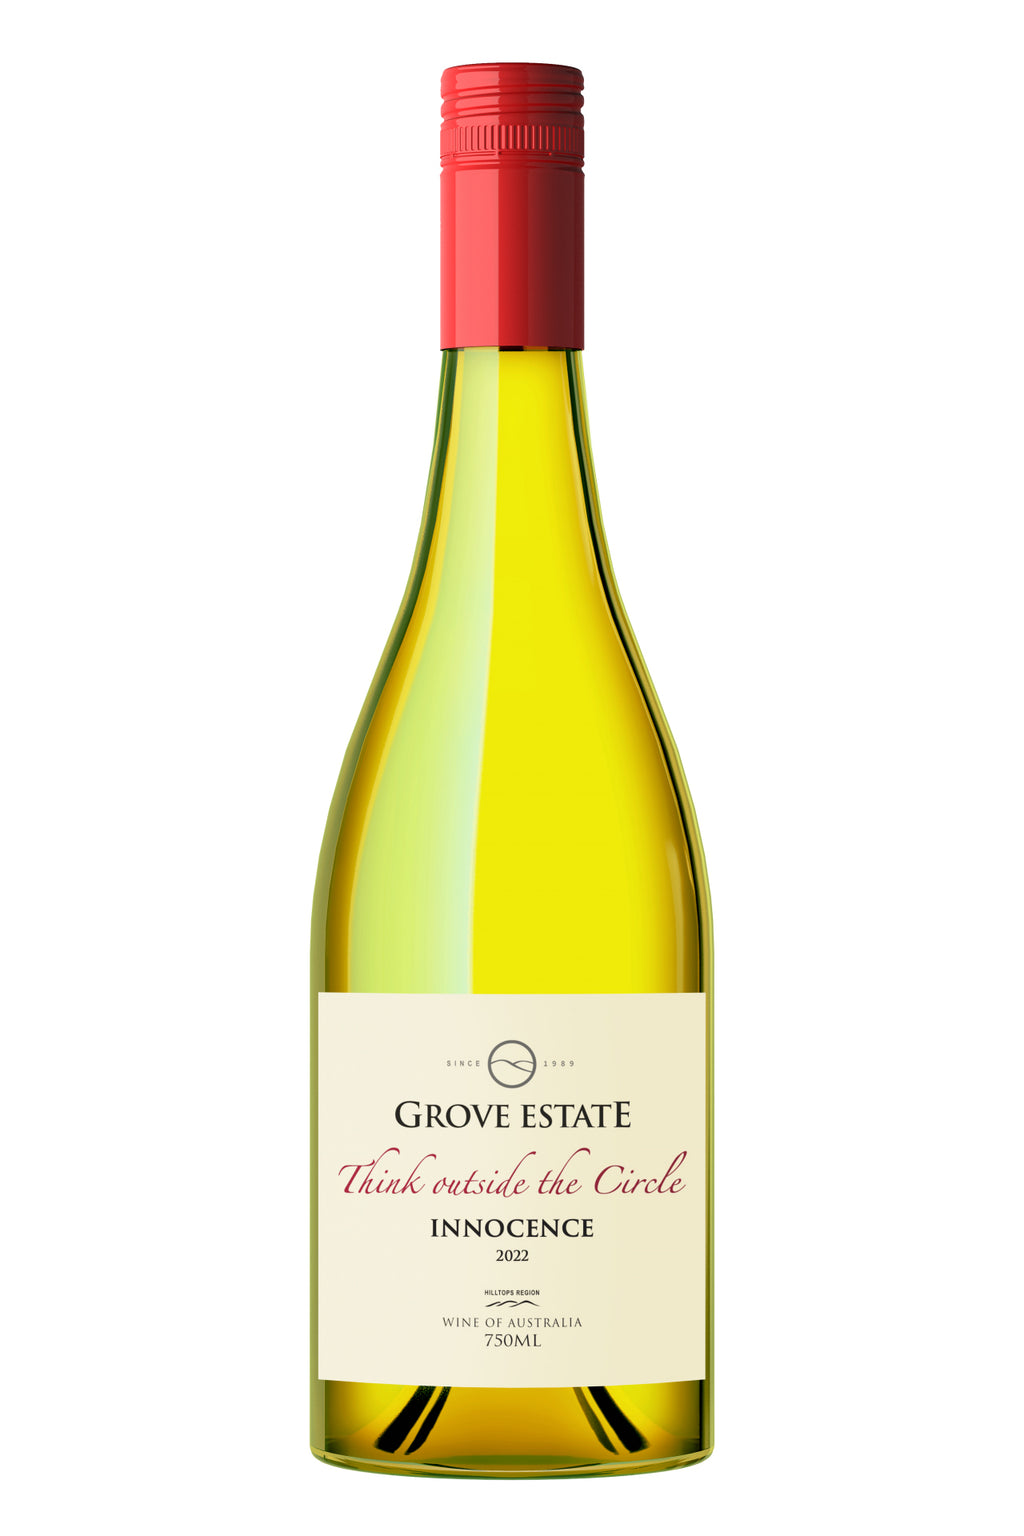 Grove Estate, Think Outside The Circle, Innocence, Viognier 2022